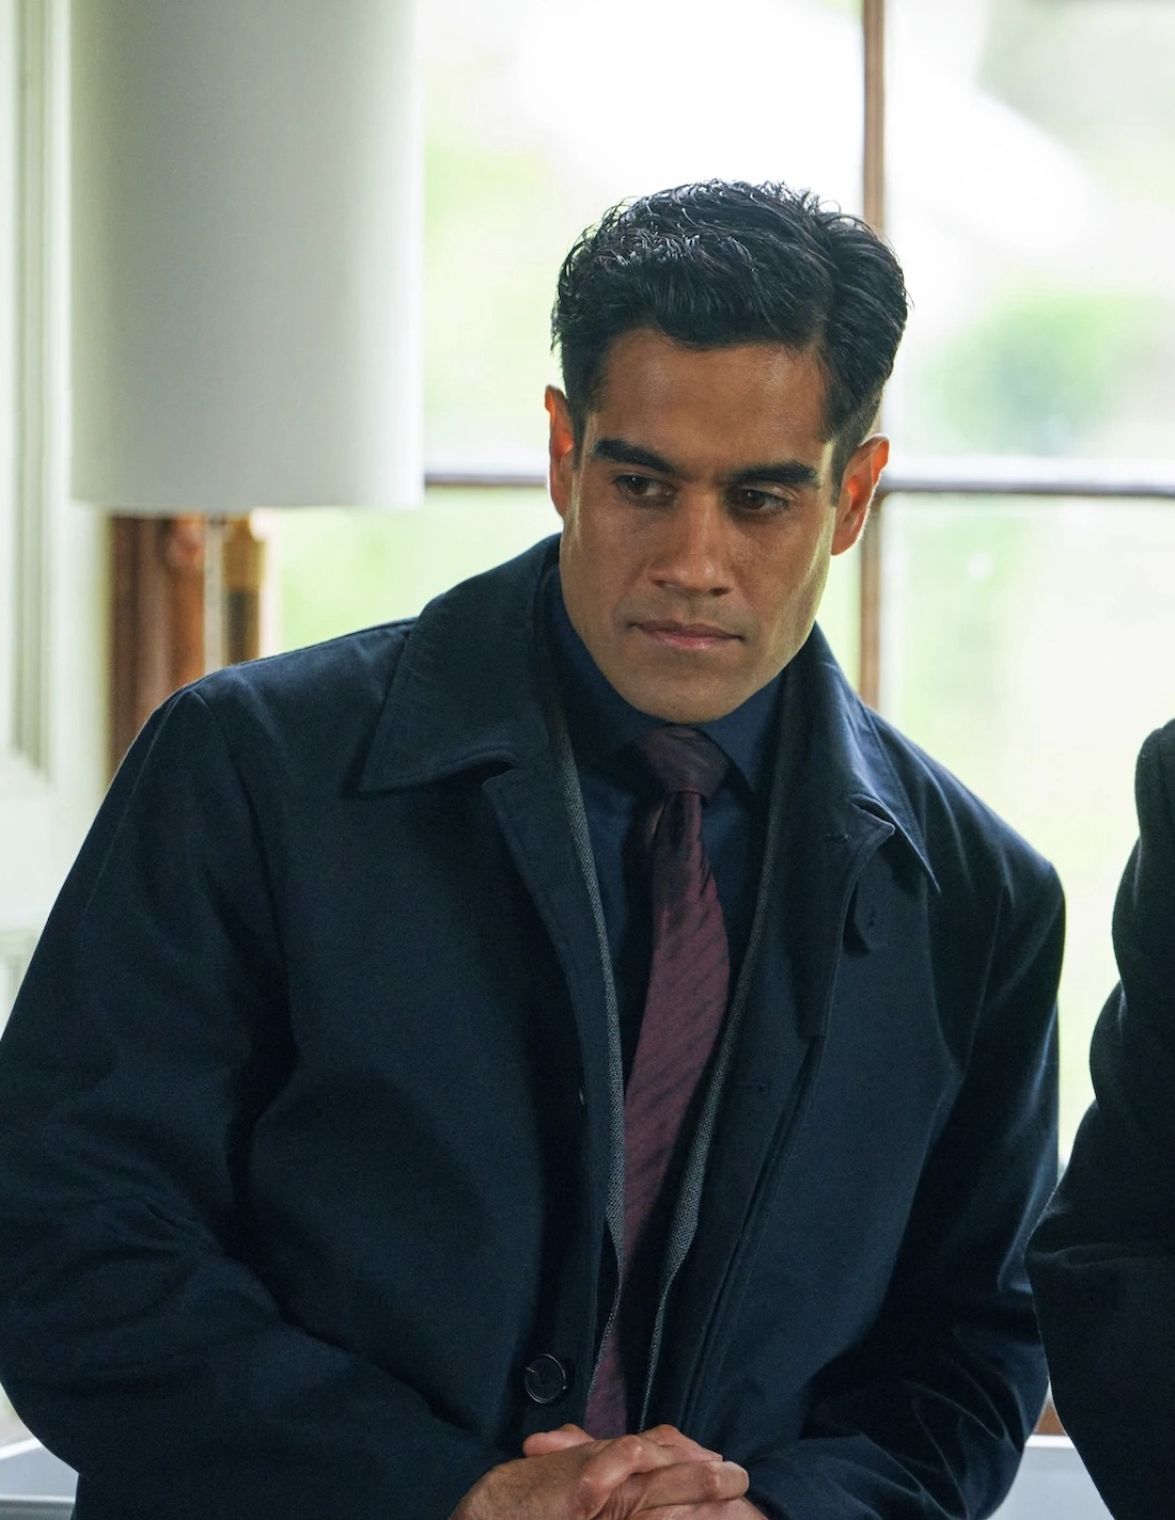 Sacha Dhawan to star in brand new BBC crime thriller ‘Wolf’